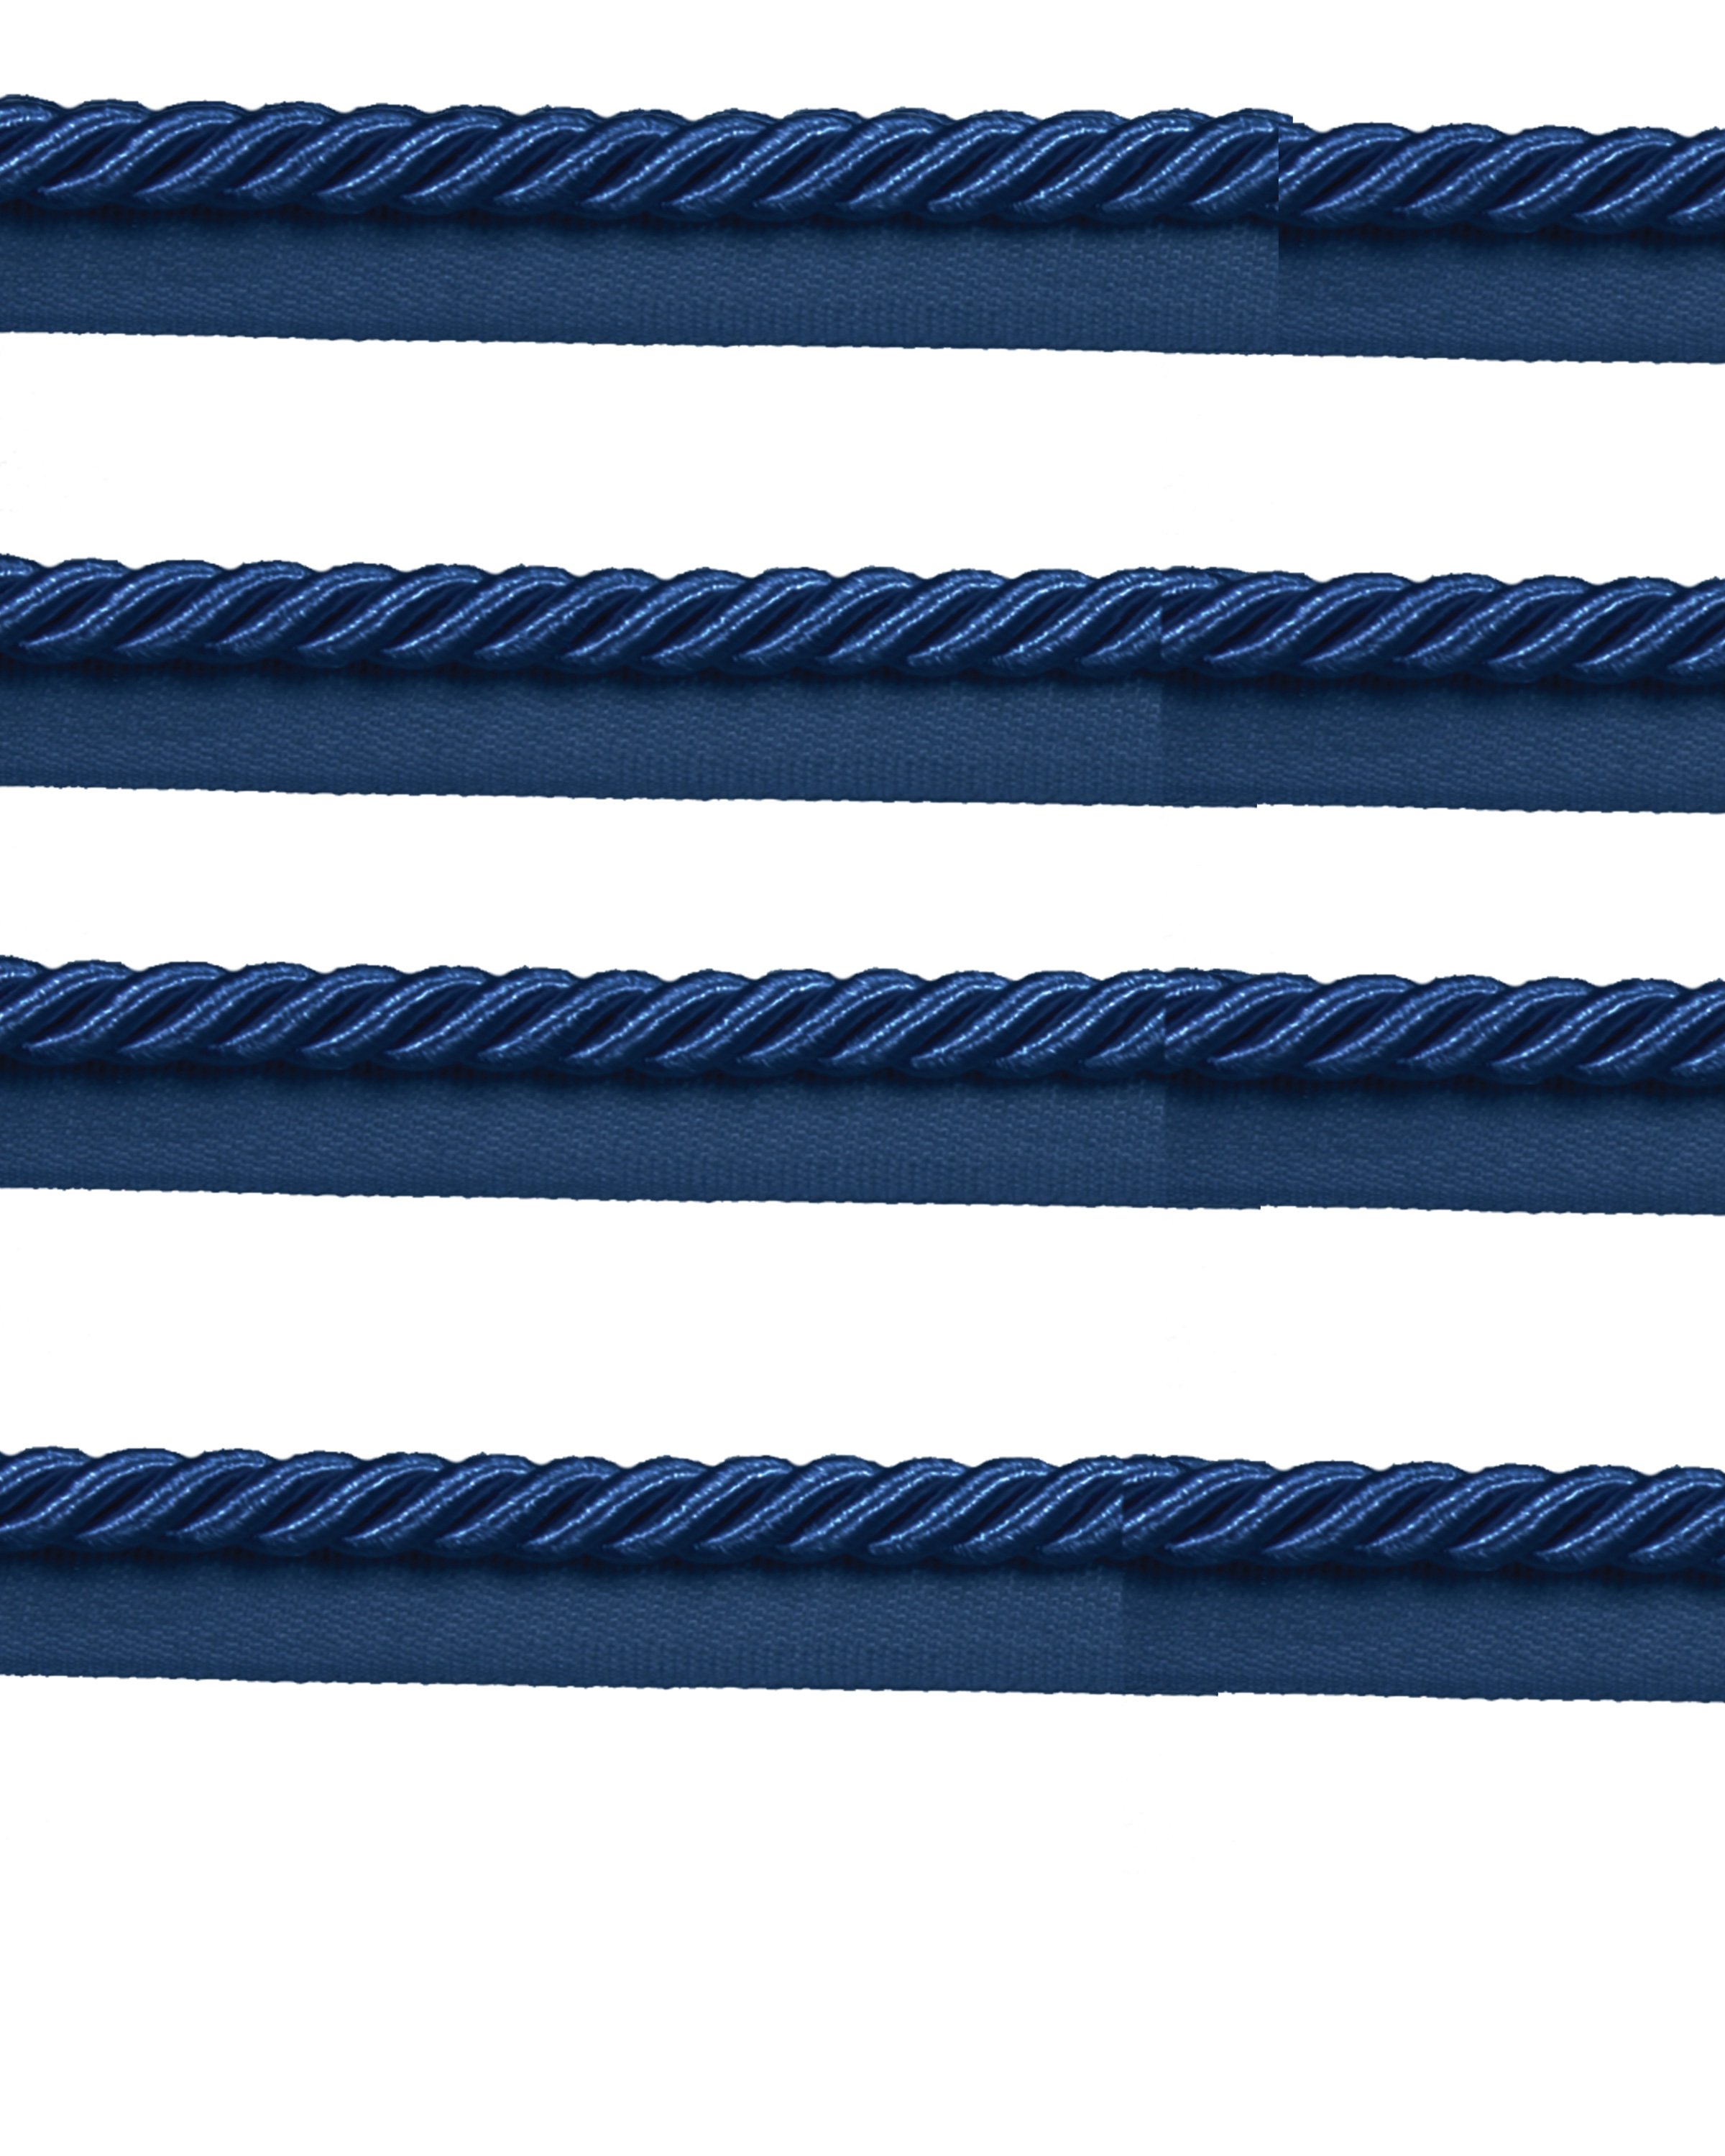 Piping Cord 8mm on Tape - Navy Blue Price is for 5 metres